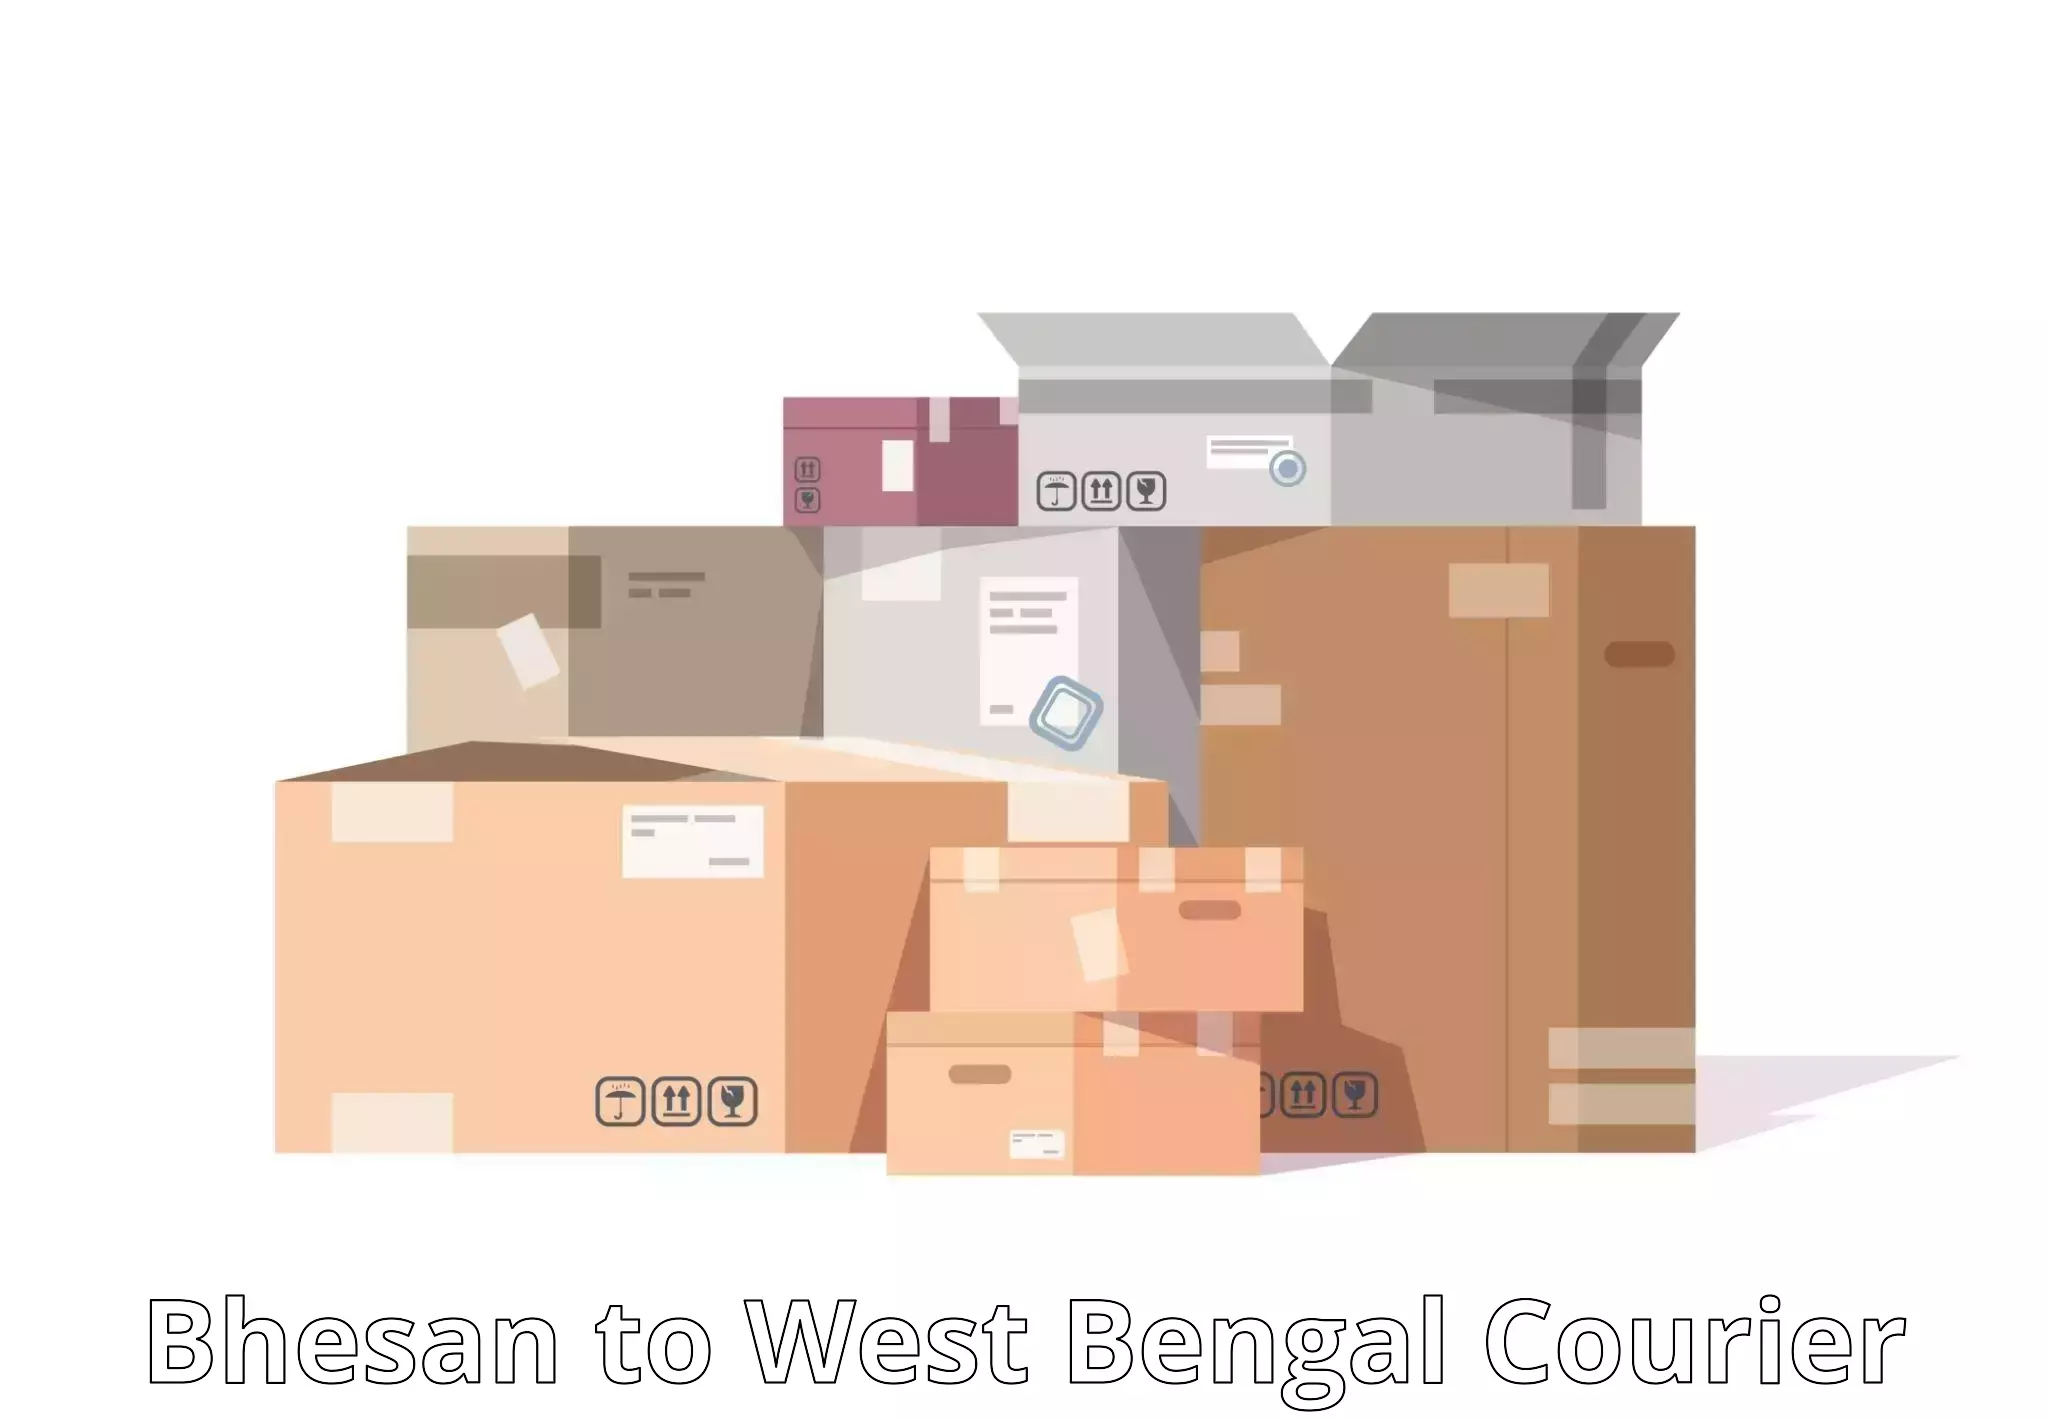 Express delivery capabilities Bhesan to South 24 Parganas